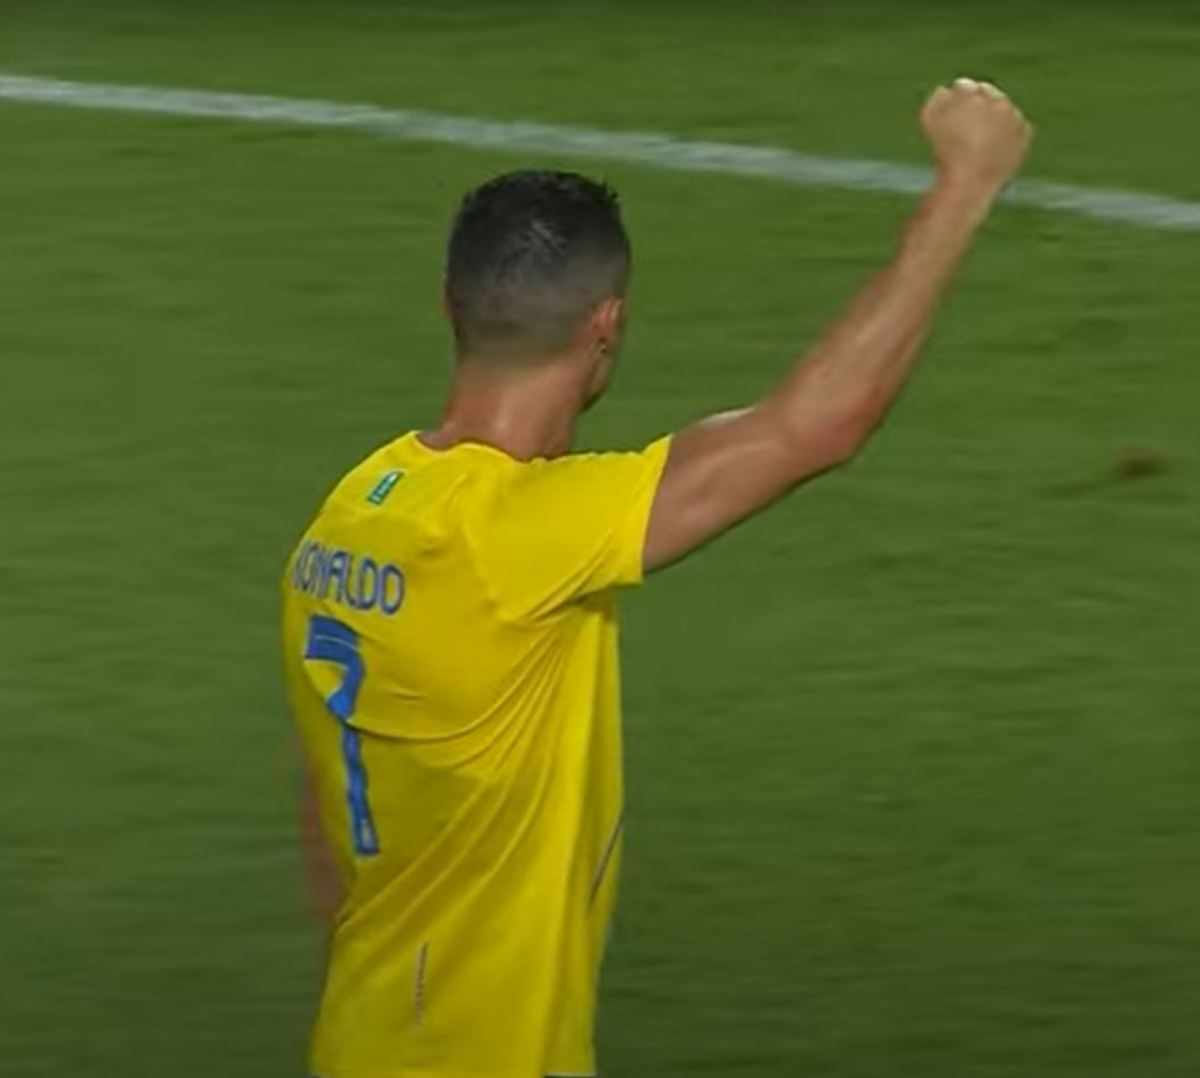 Al Nassr captain Cristiano Ronaldo pictured celebrating after his team beat Dubai's Shabab Al-Ahli 4-2 in the play-off round of the 2023/24 AFC Champions League